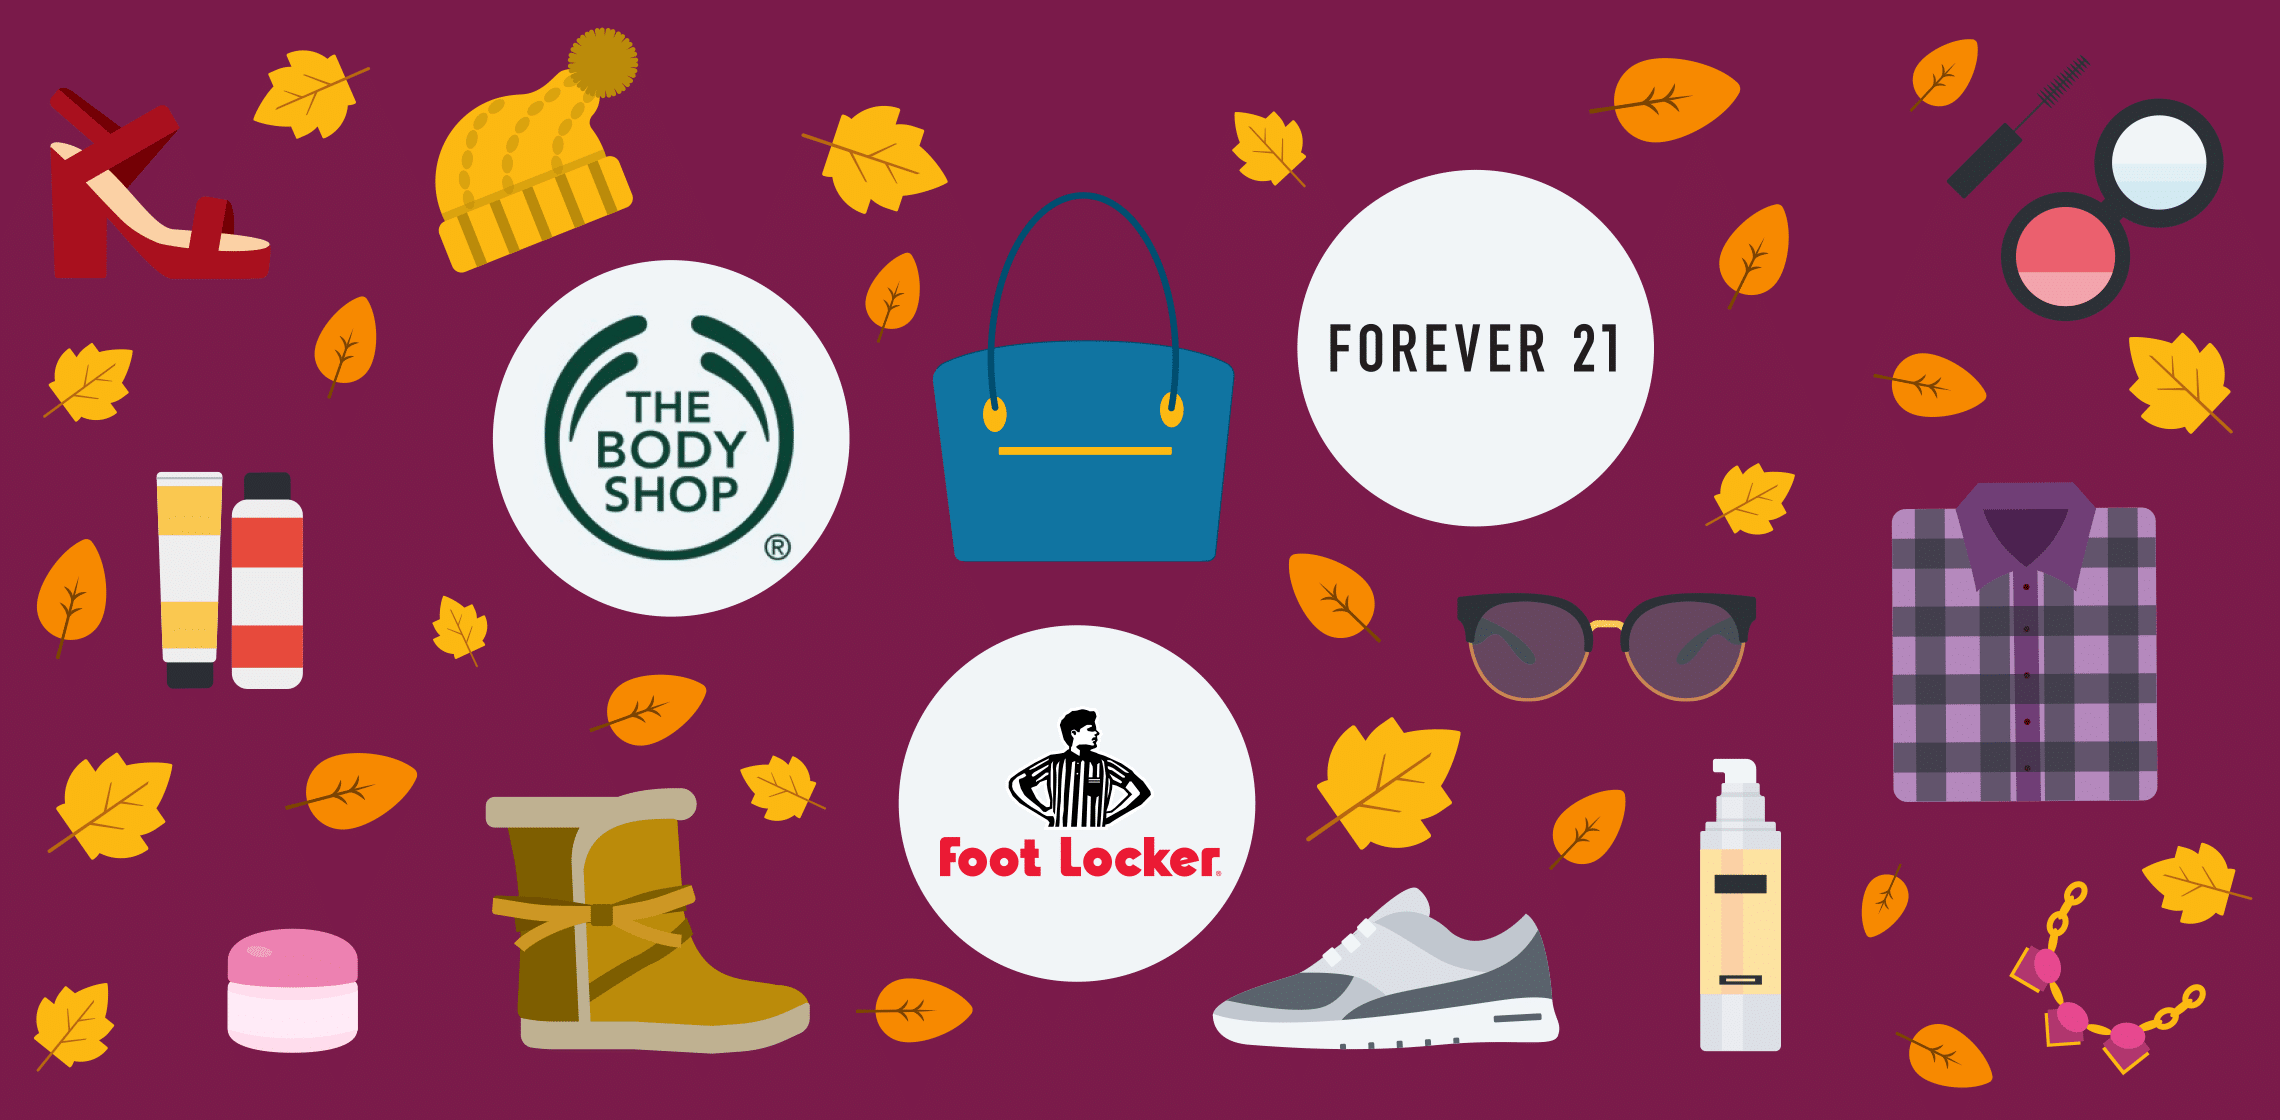 Earn Head to Toe Kicks at The Body Shop, Forever 21, and Footlocker